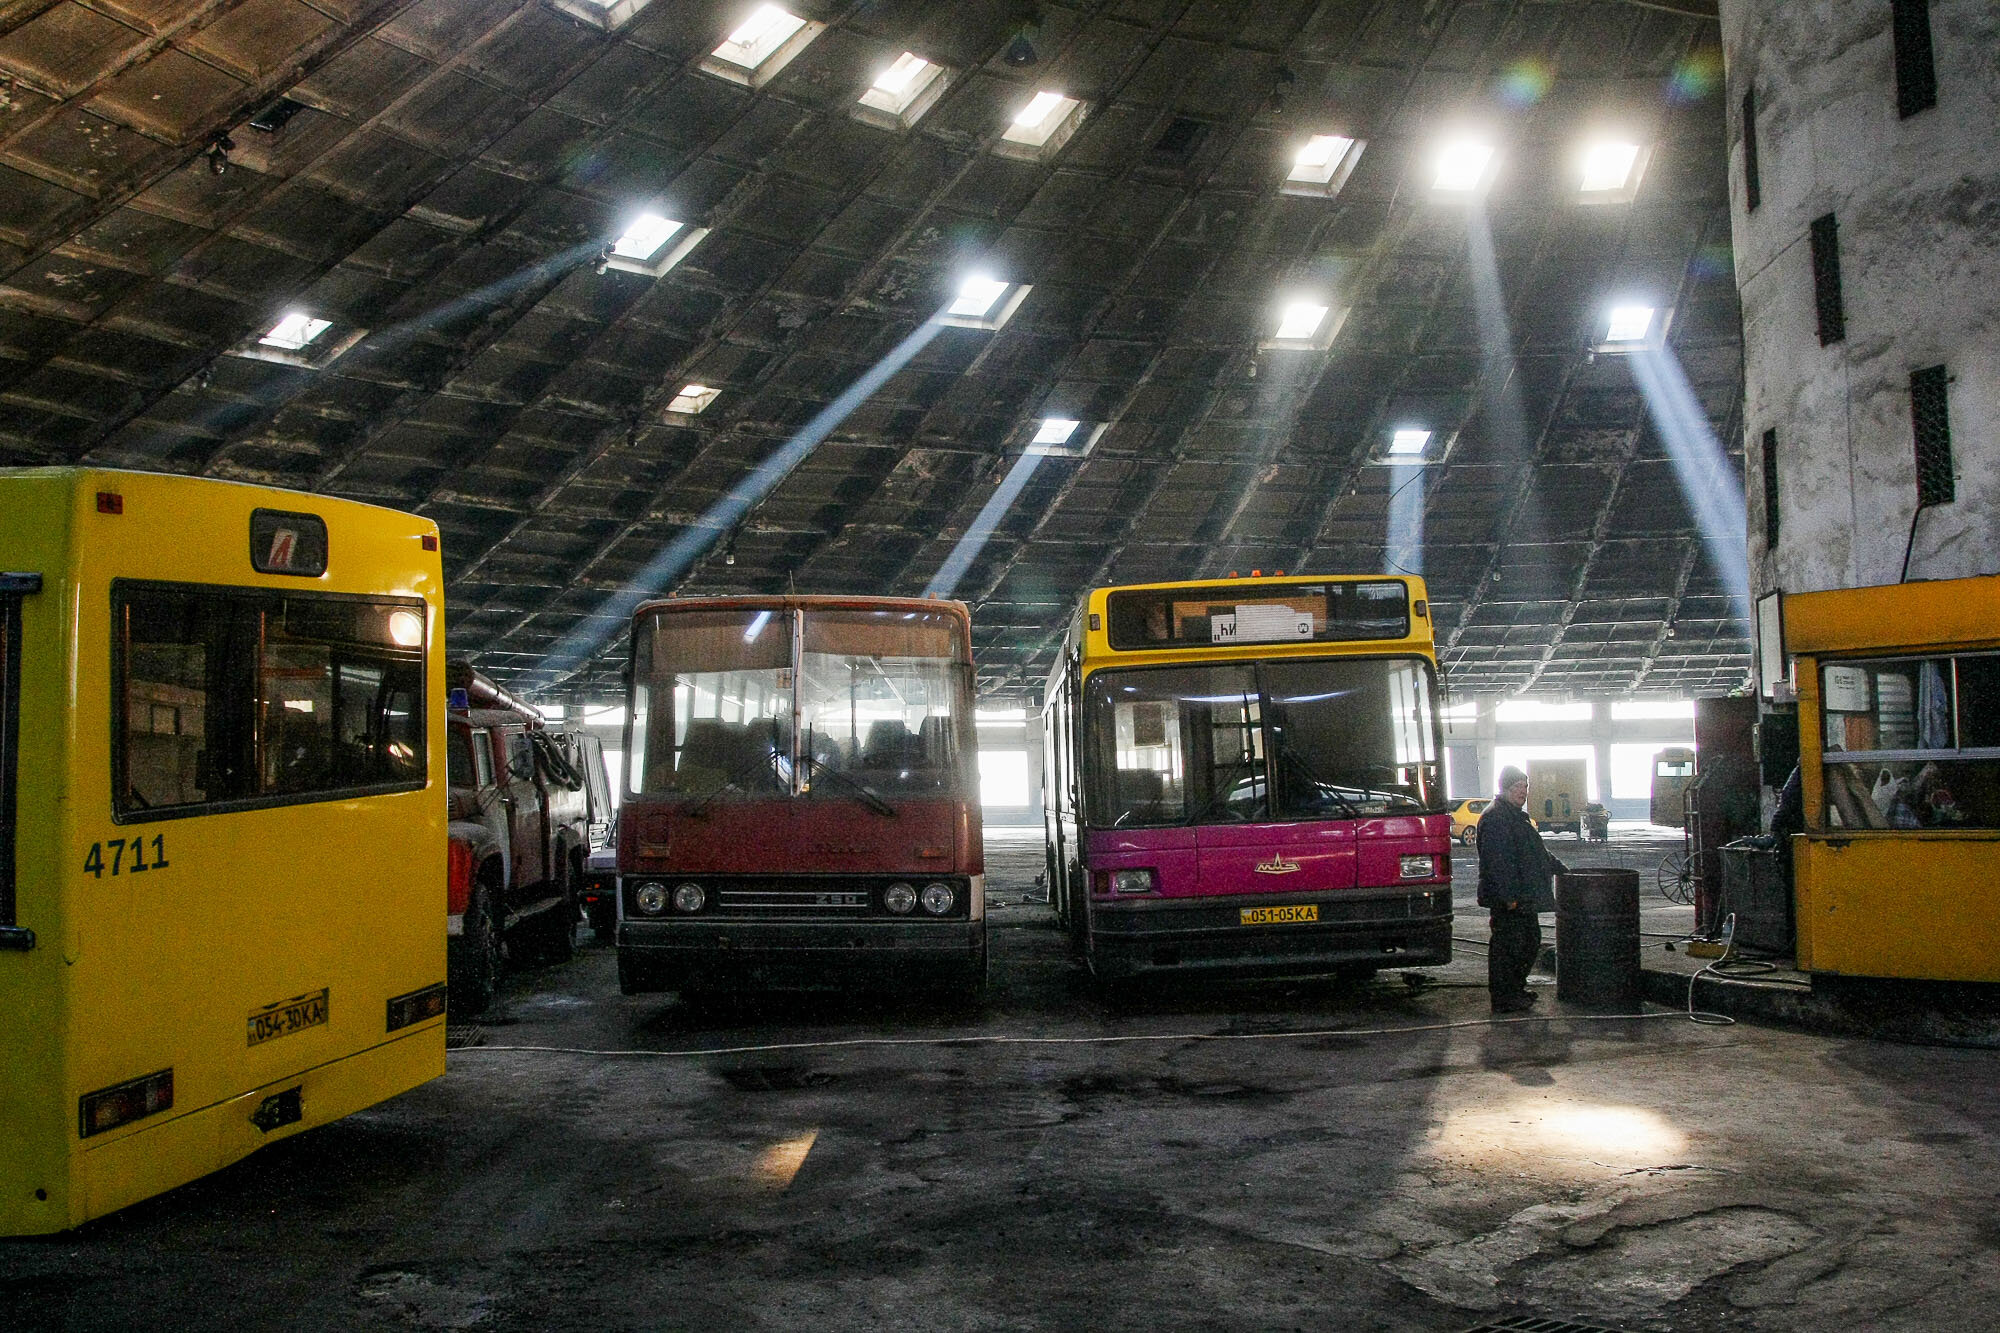 The abandoned Bus Depot #7 is located on the outskirts of Kyiv near the Chervonyi Khutir metro station.